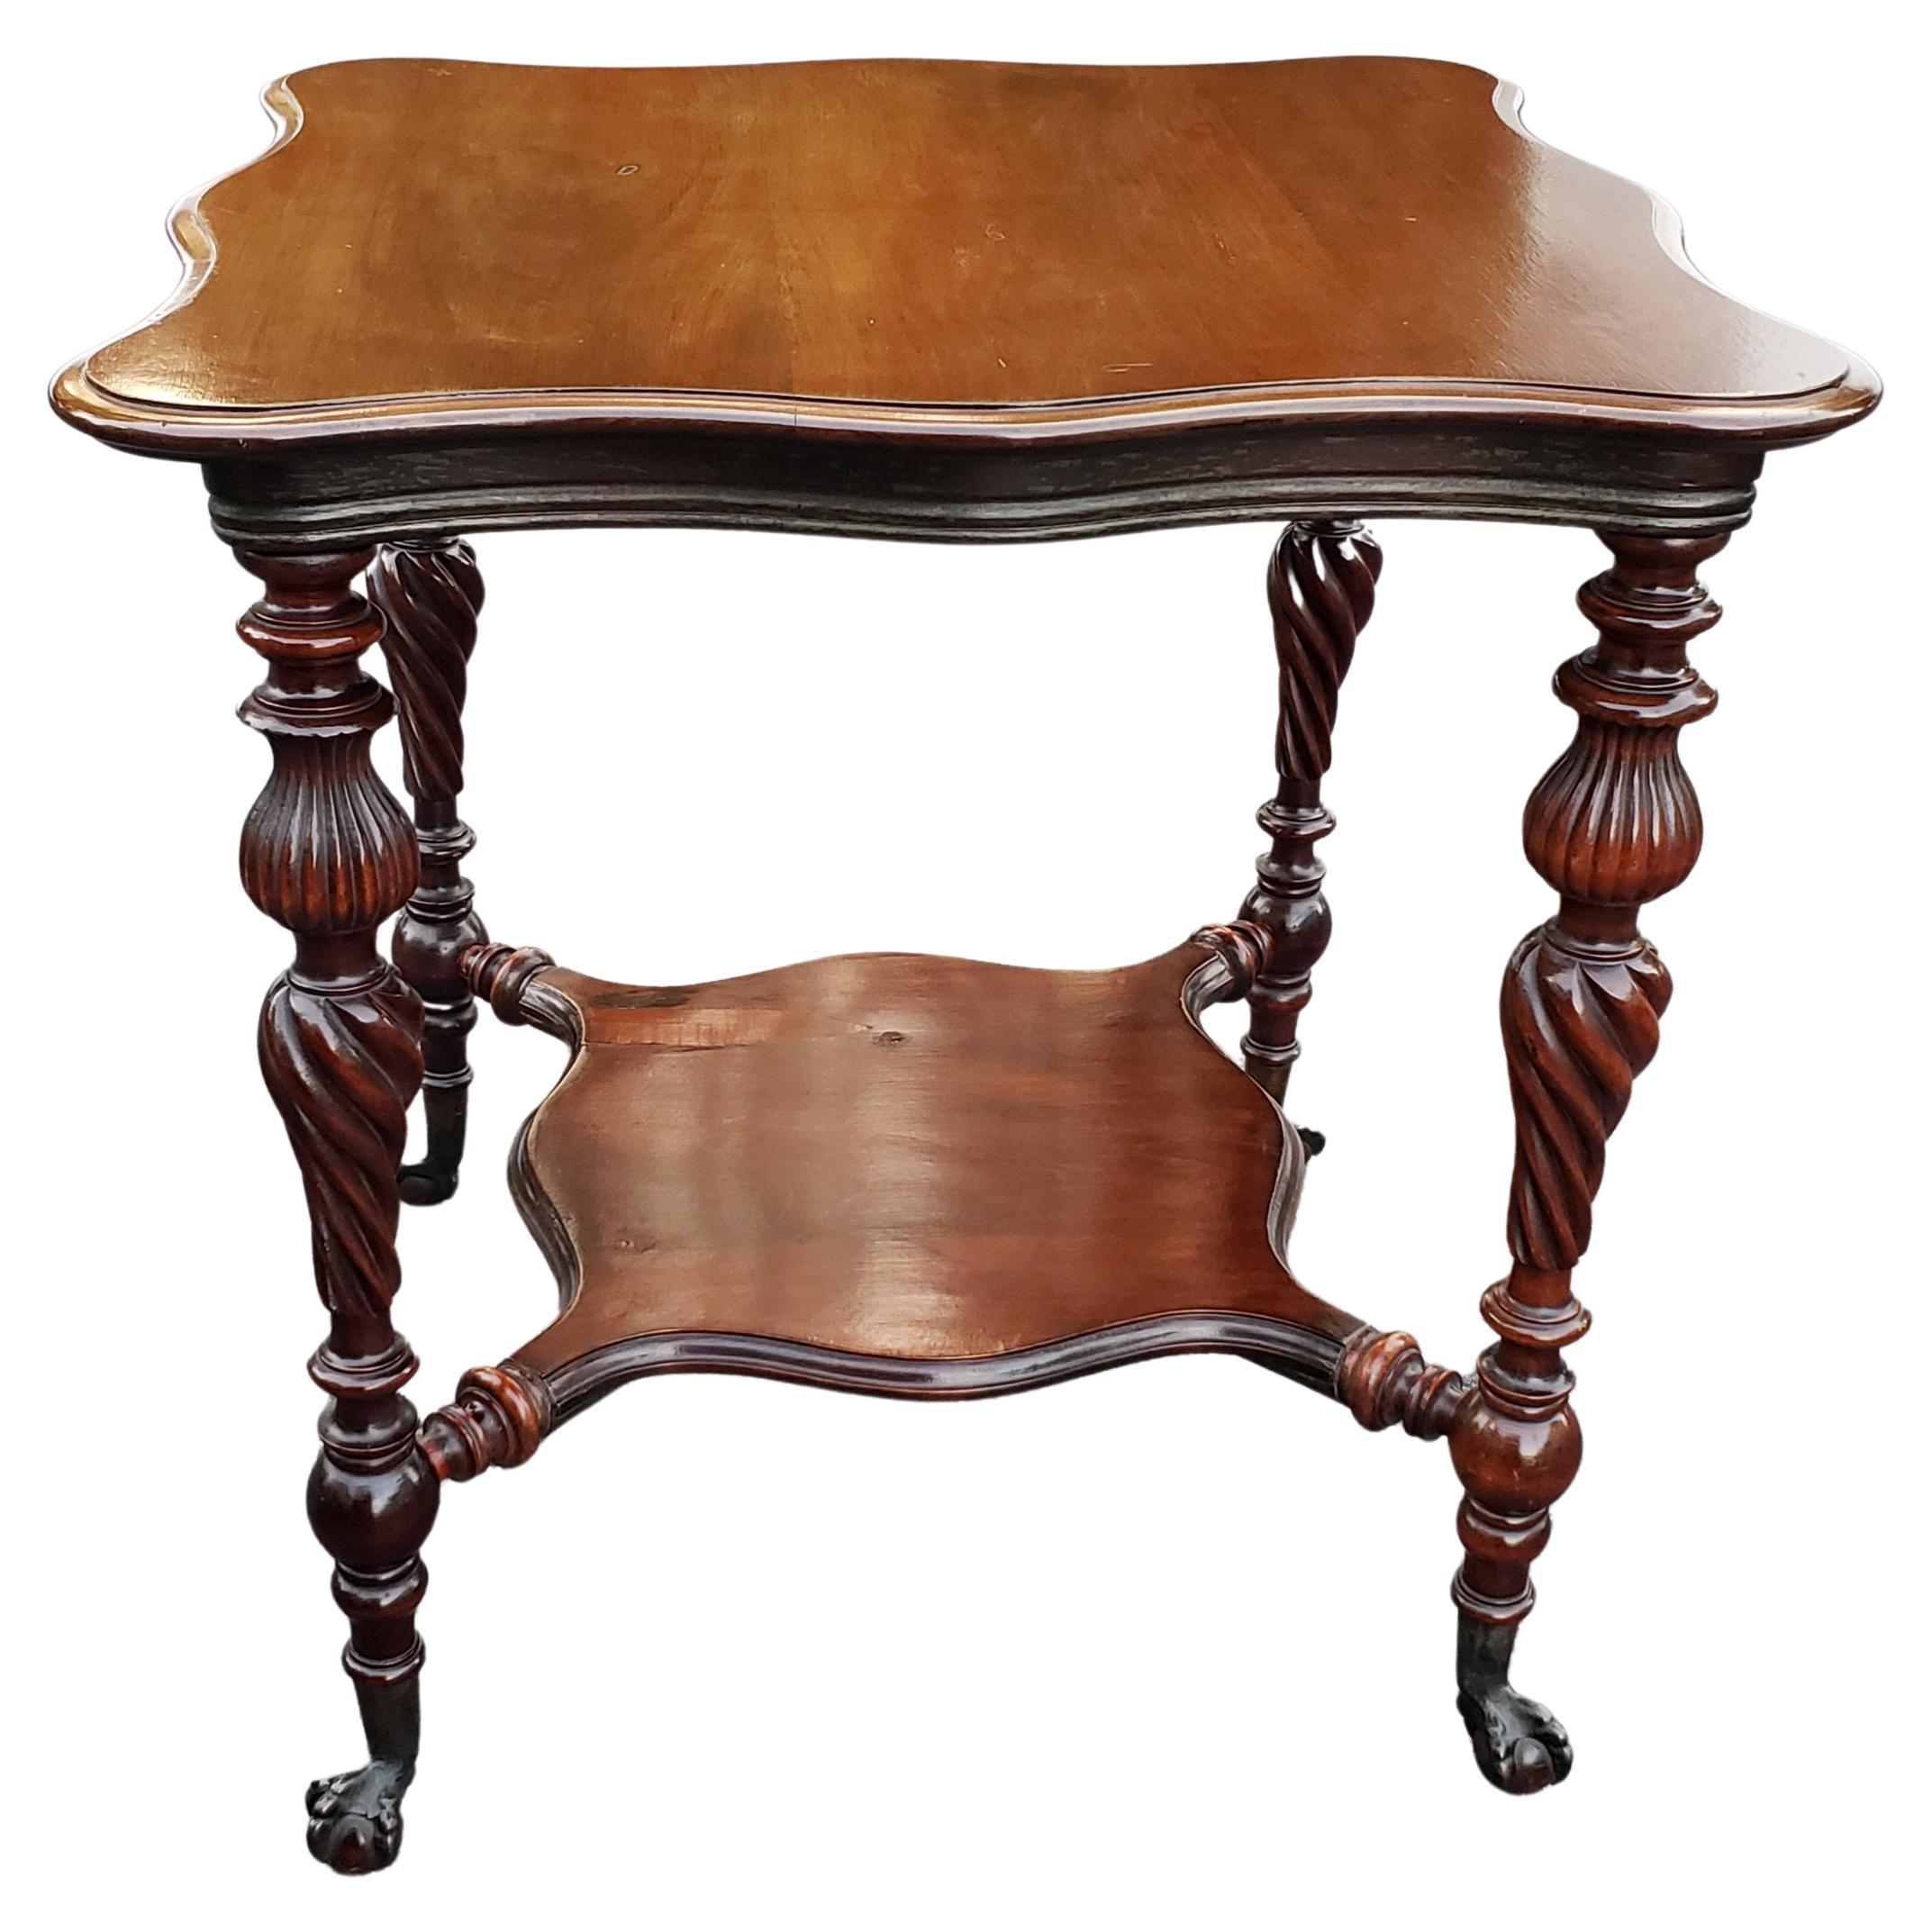 1930s Regency Style Mahogany Tiered Tea Table with Ball Claw Feet For Sale